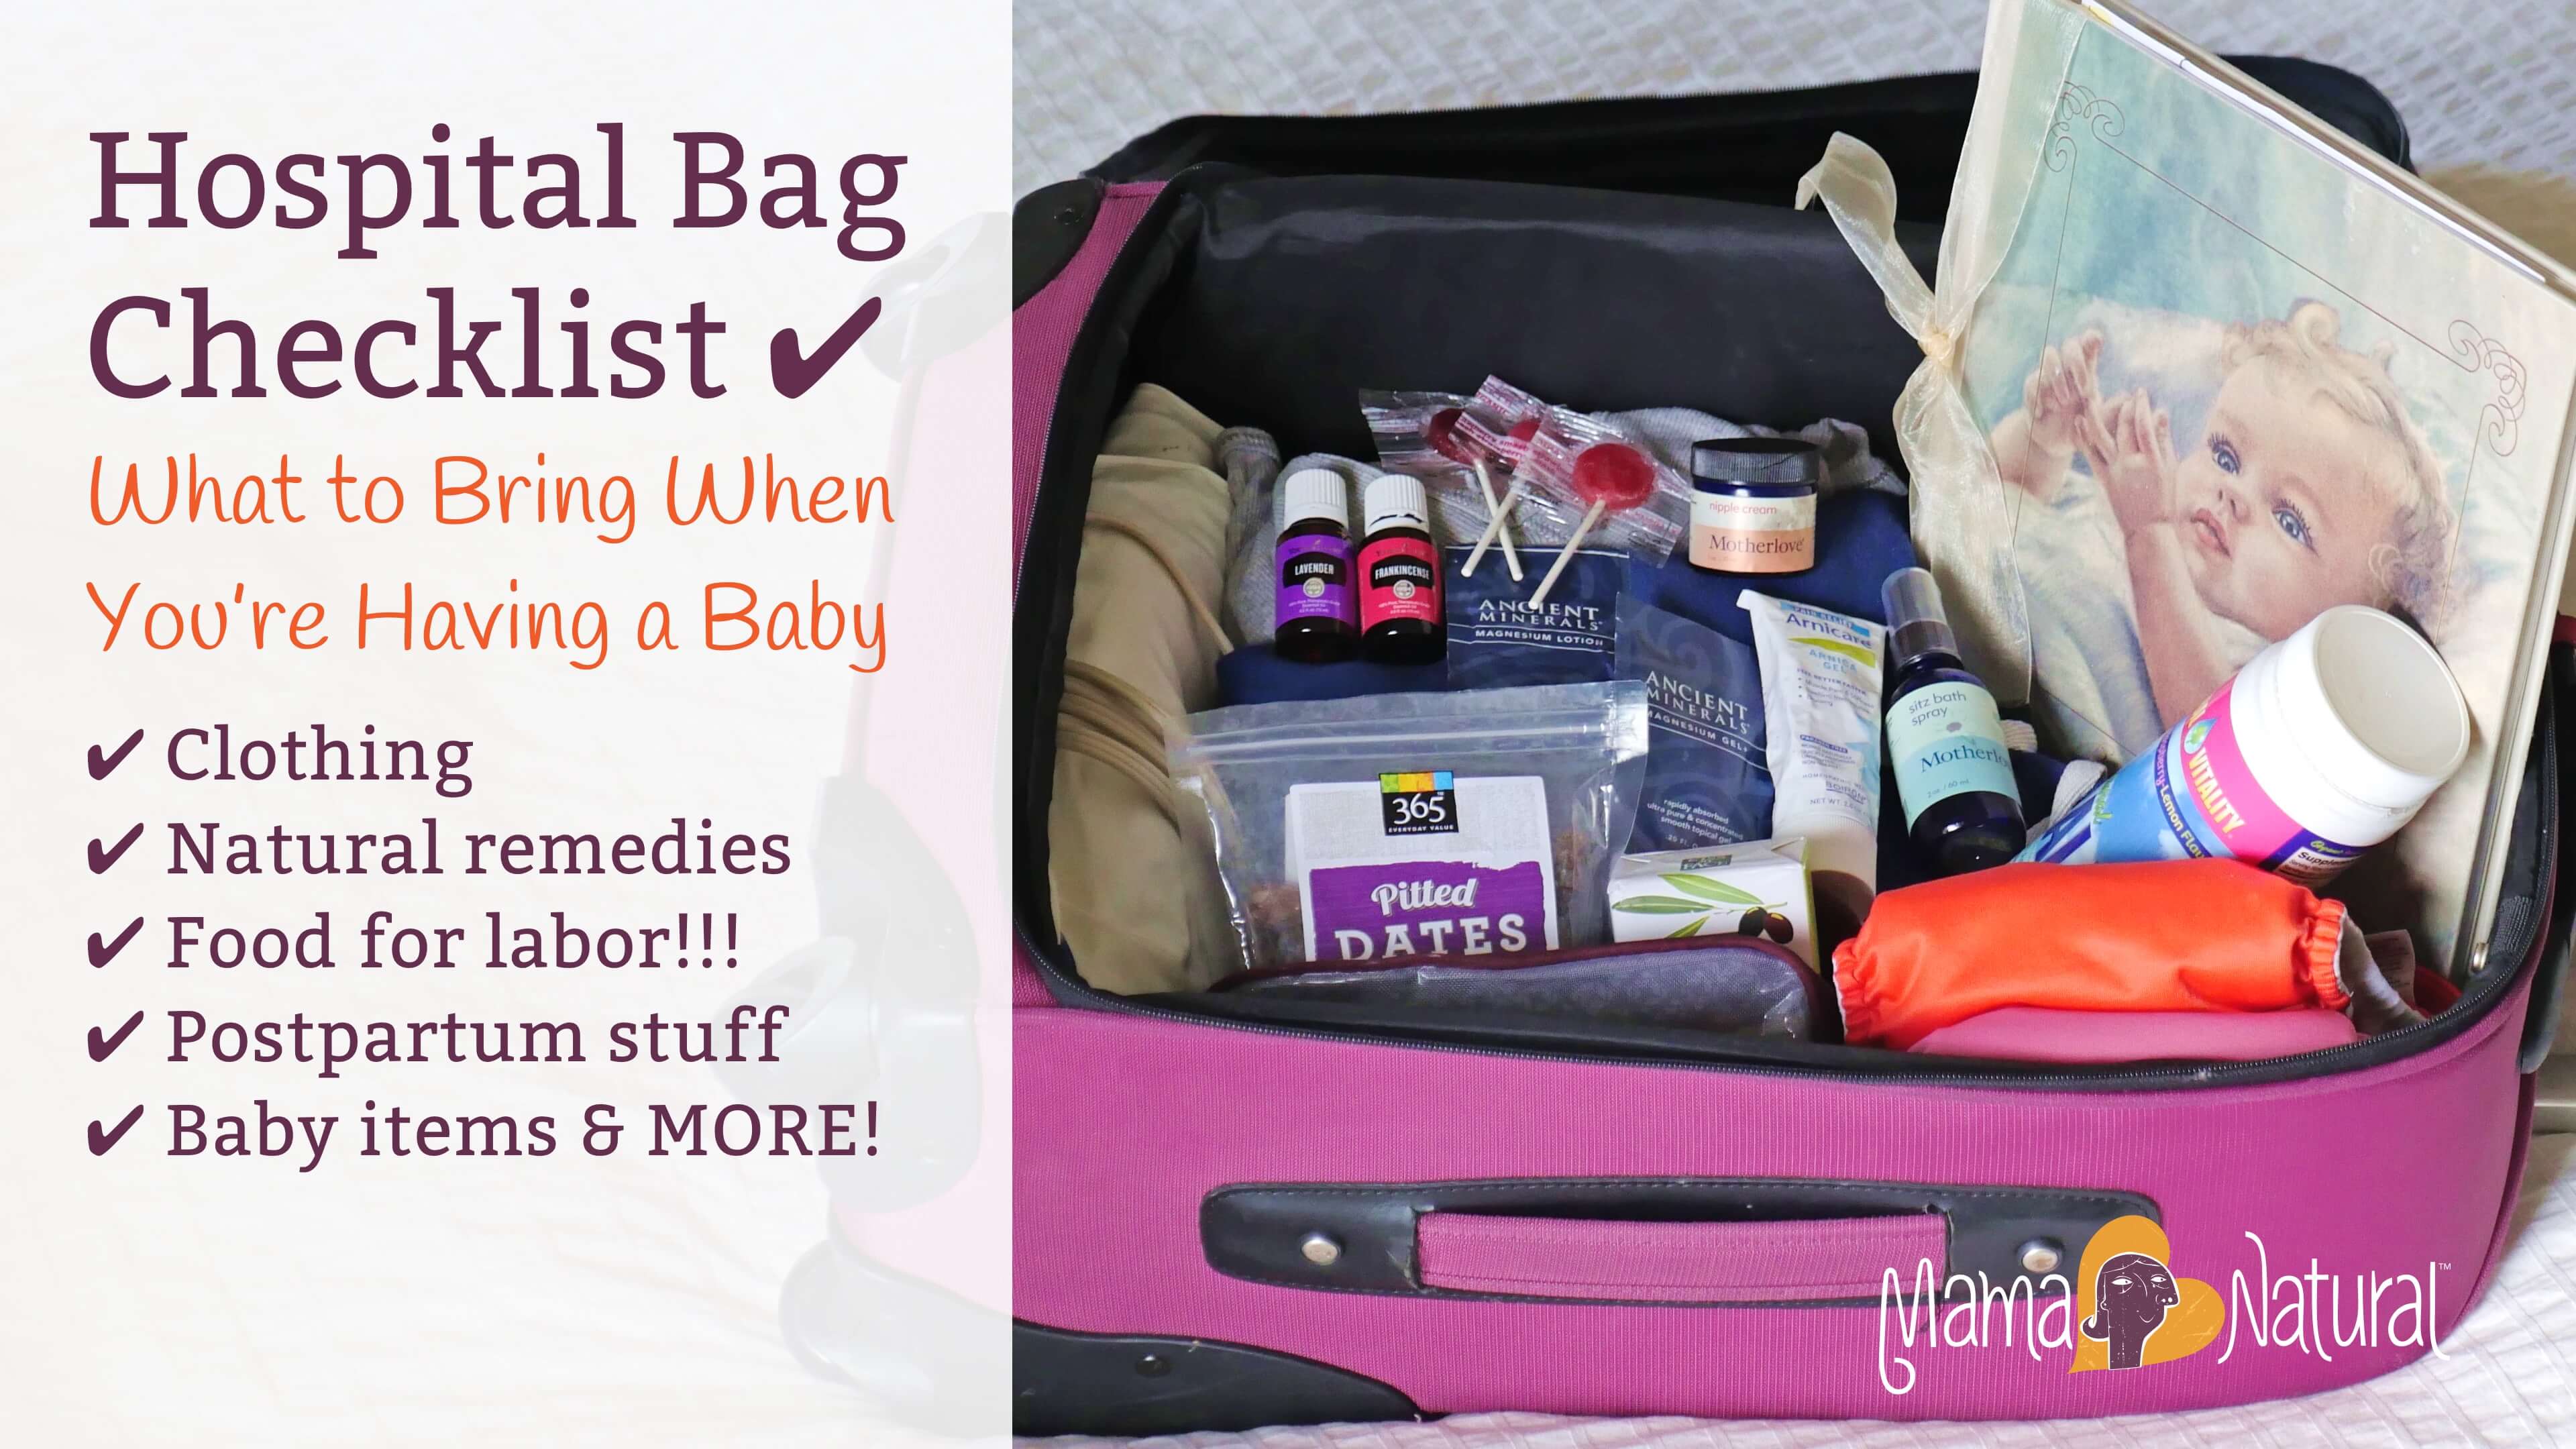 https://www.mamanatural.com/wp-content/uploads/Hospital-Bag-Checklist-What-to-Bring-When-You%E2%80%99re-Having-a-Baby-by-Mama-Natural-social.jpg